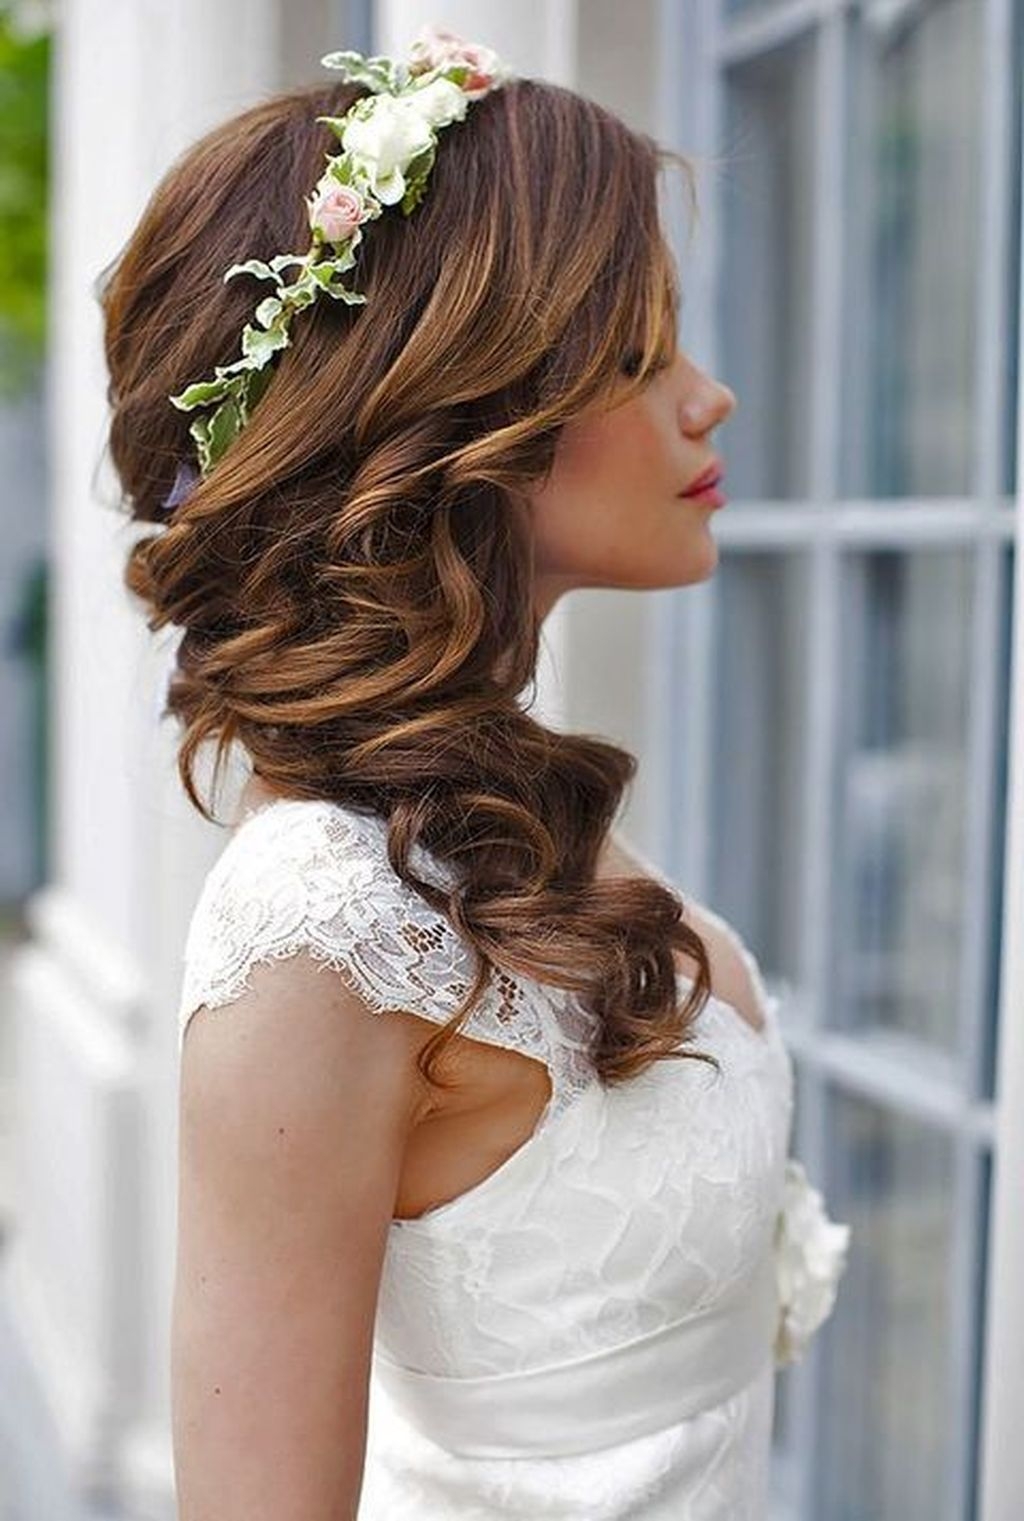 40 Elegant Wedding Hairstyle Ideas For Brides To Try 7707